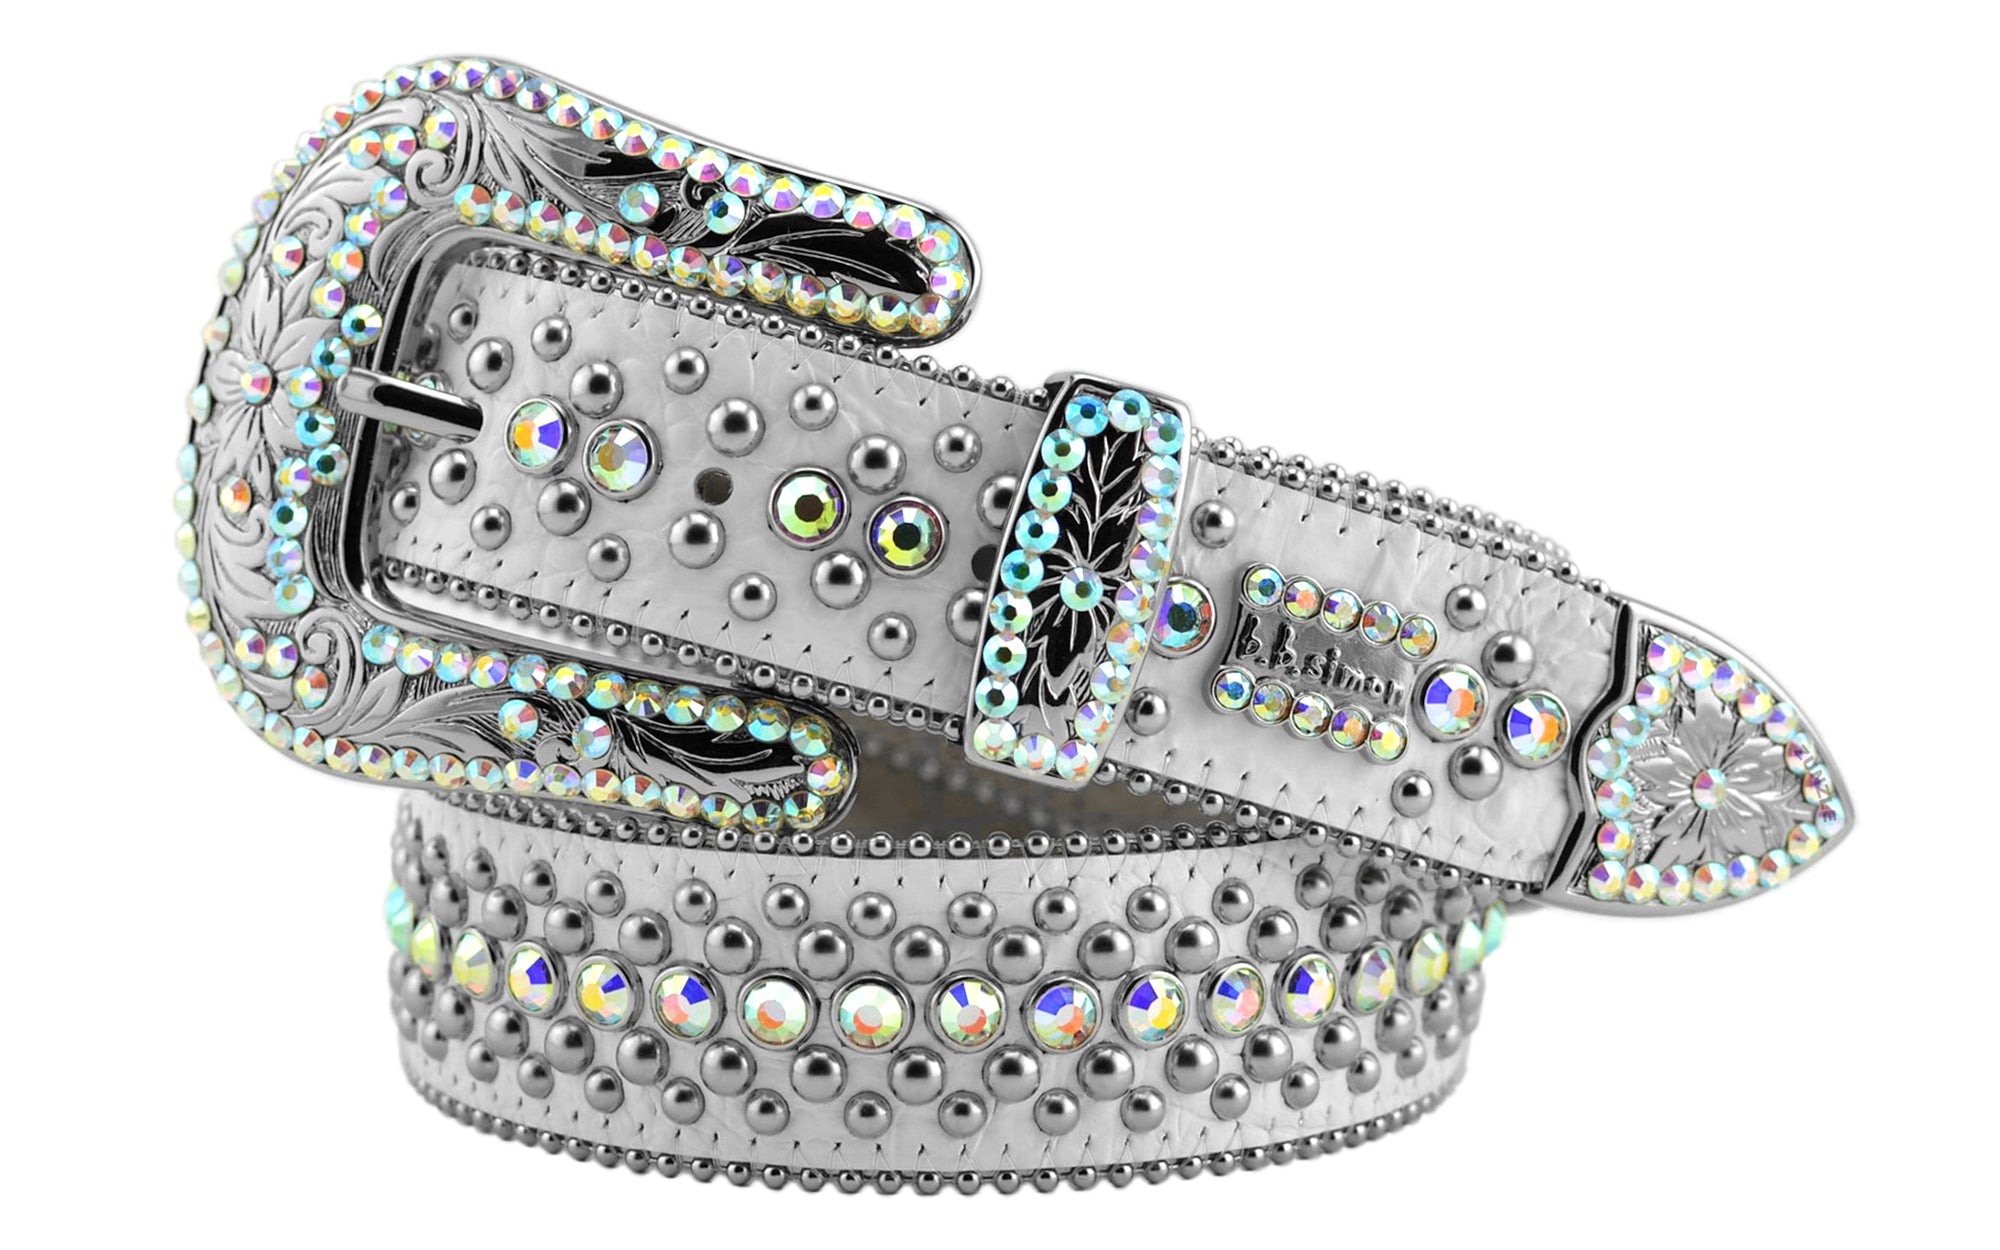 bb simon Silver Merry Leather Belt With Swarovski Crystals [1689